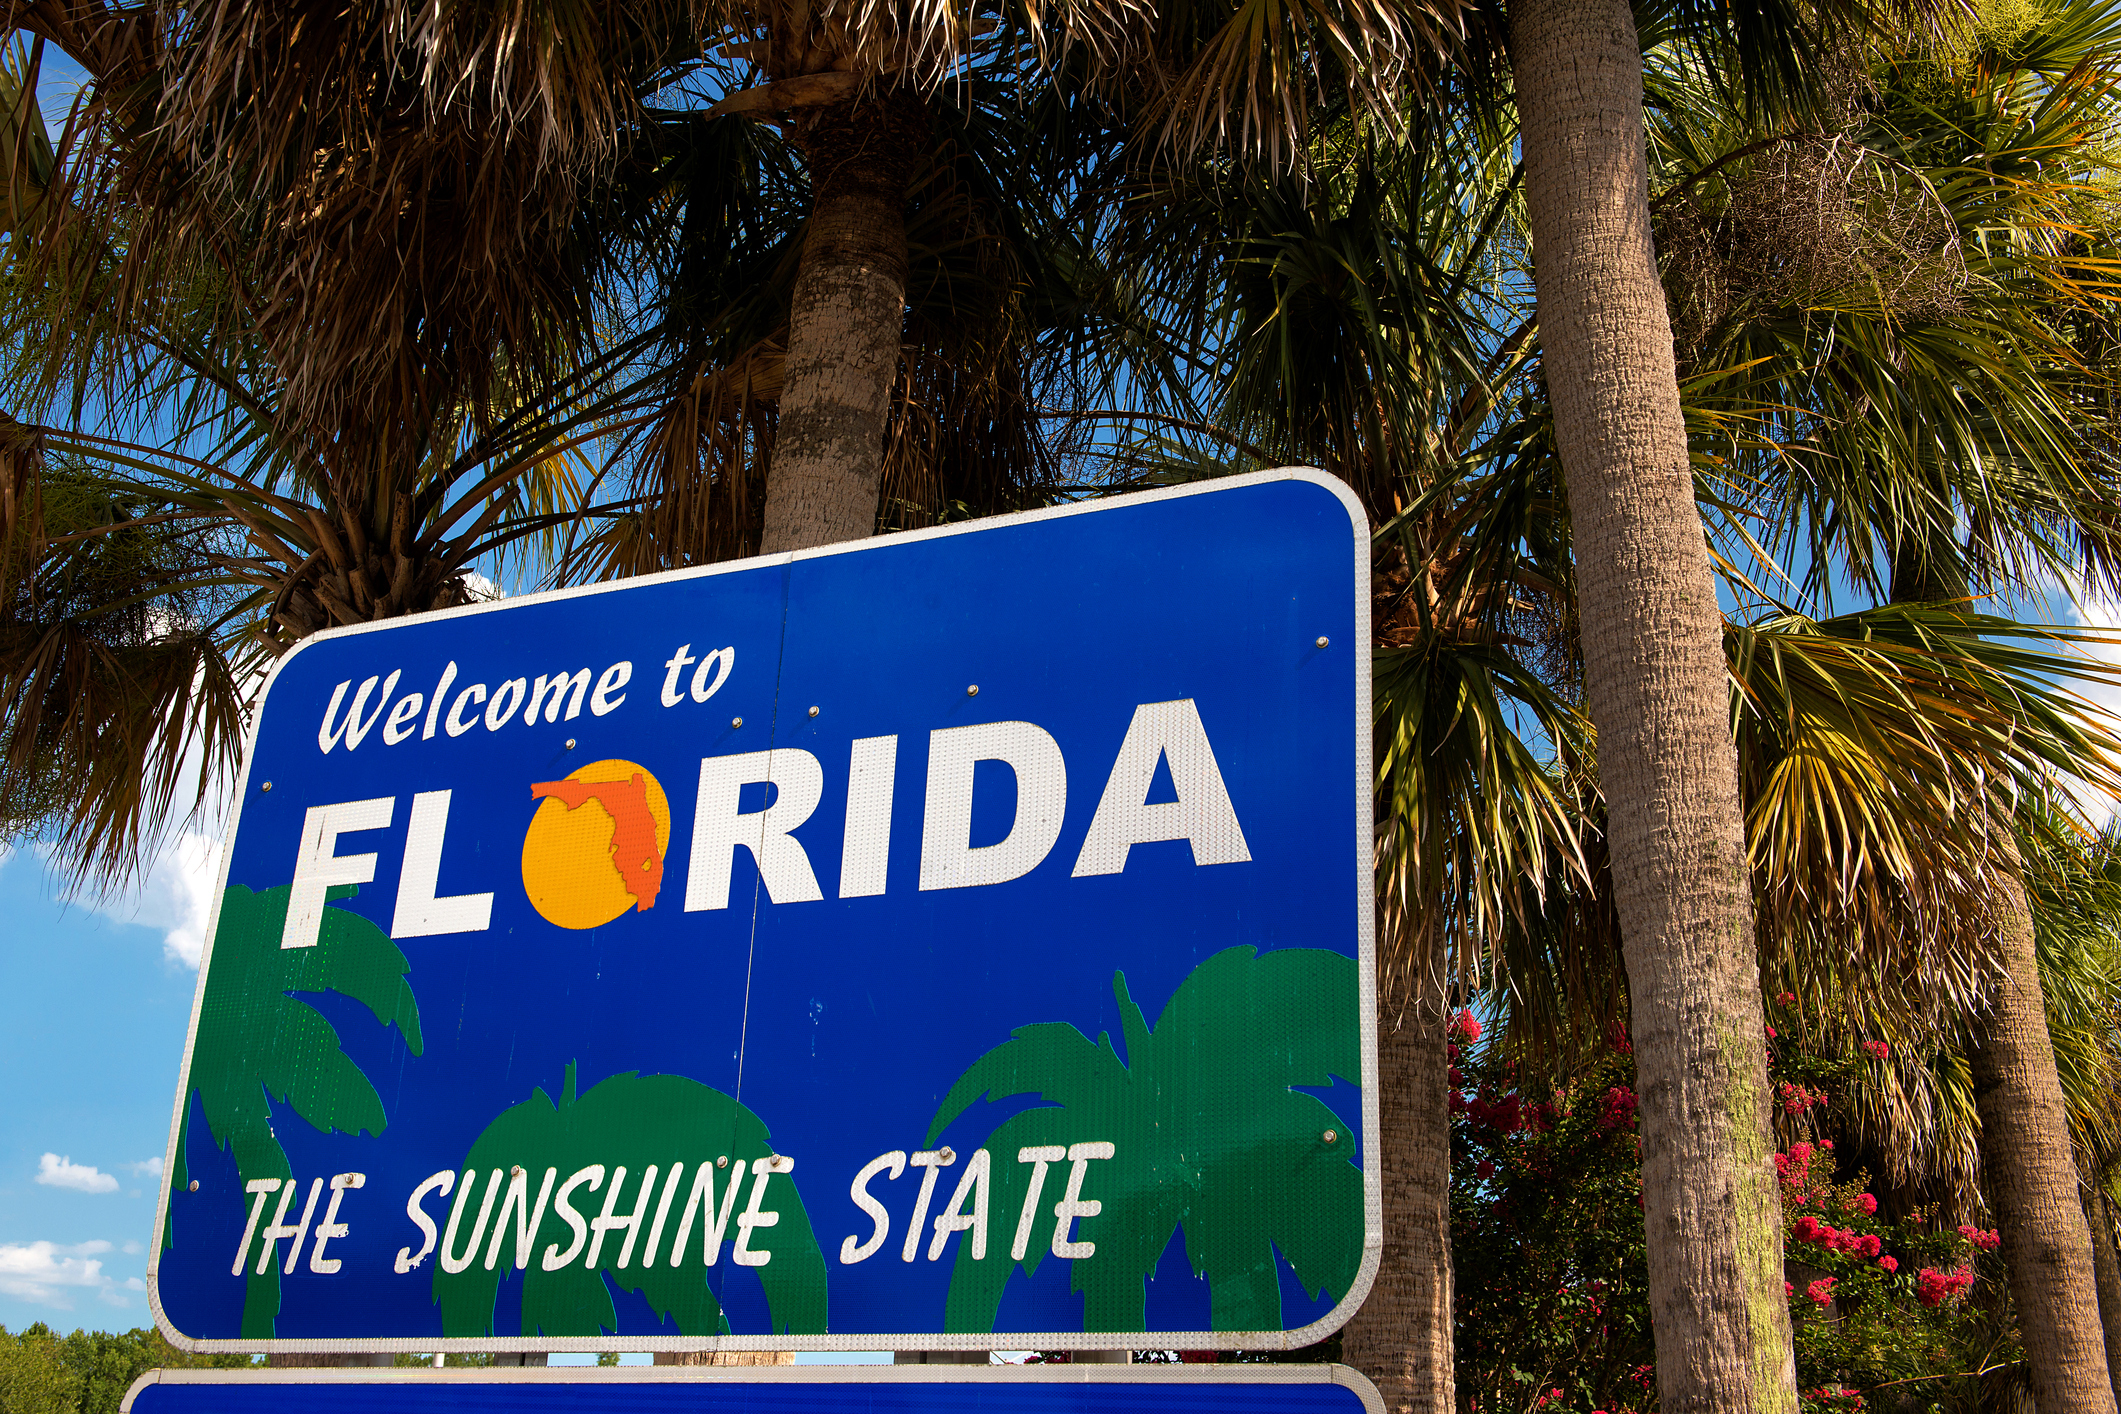 Arizona vs. Florida for Retirement: Which Is Best for You?